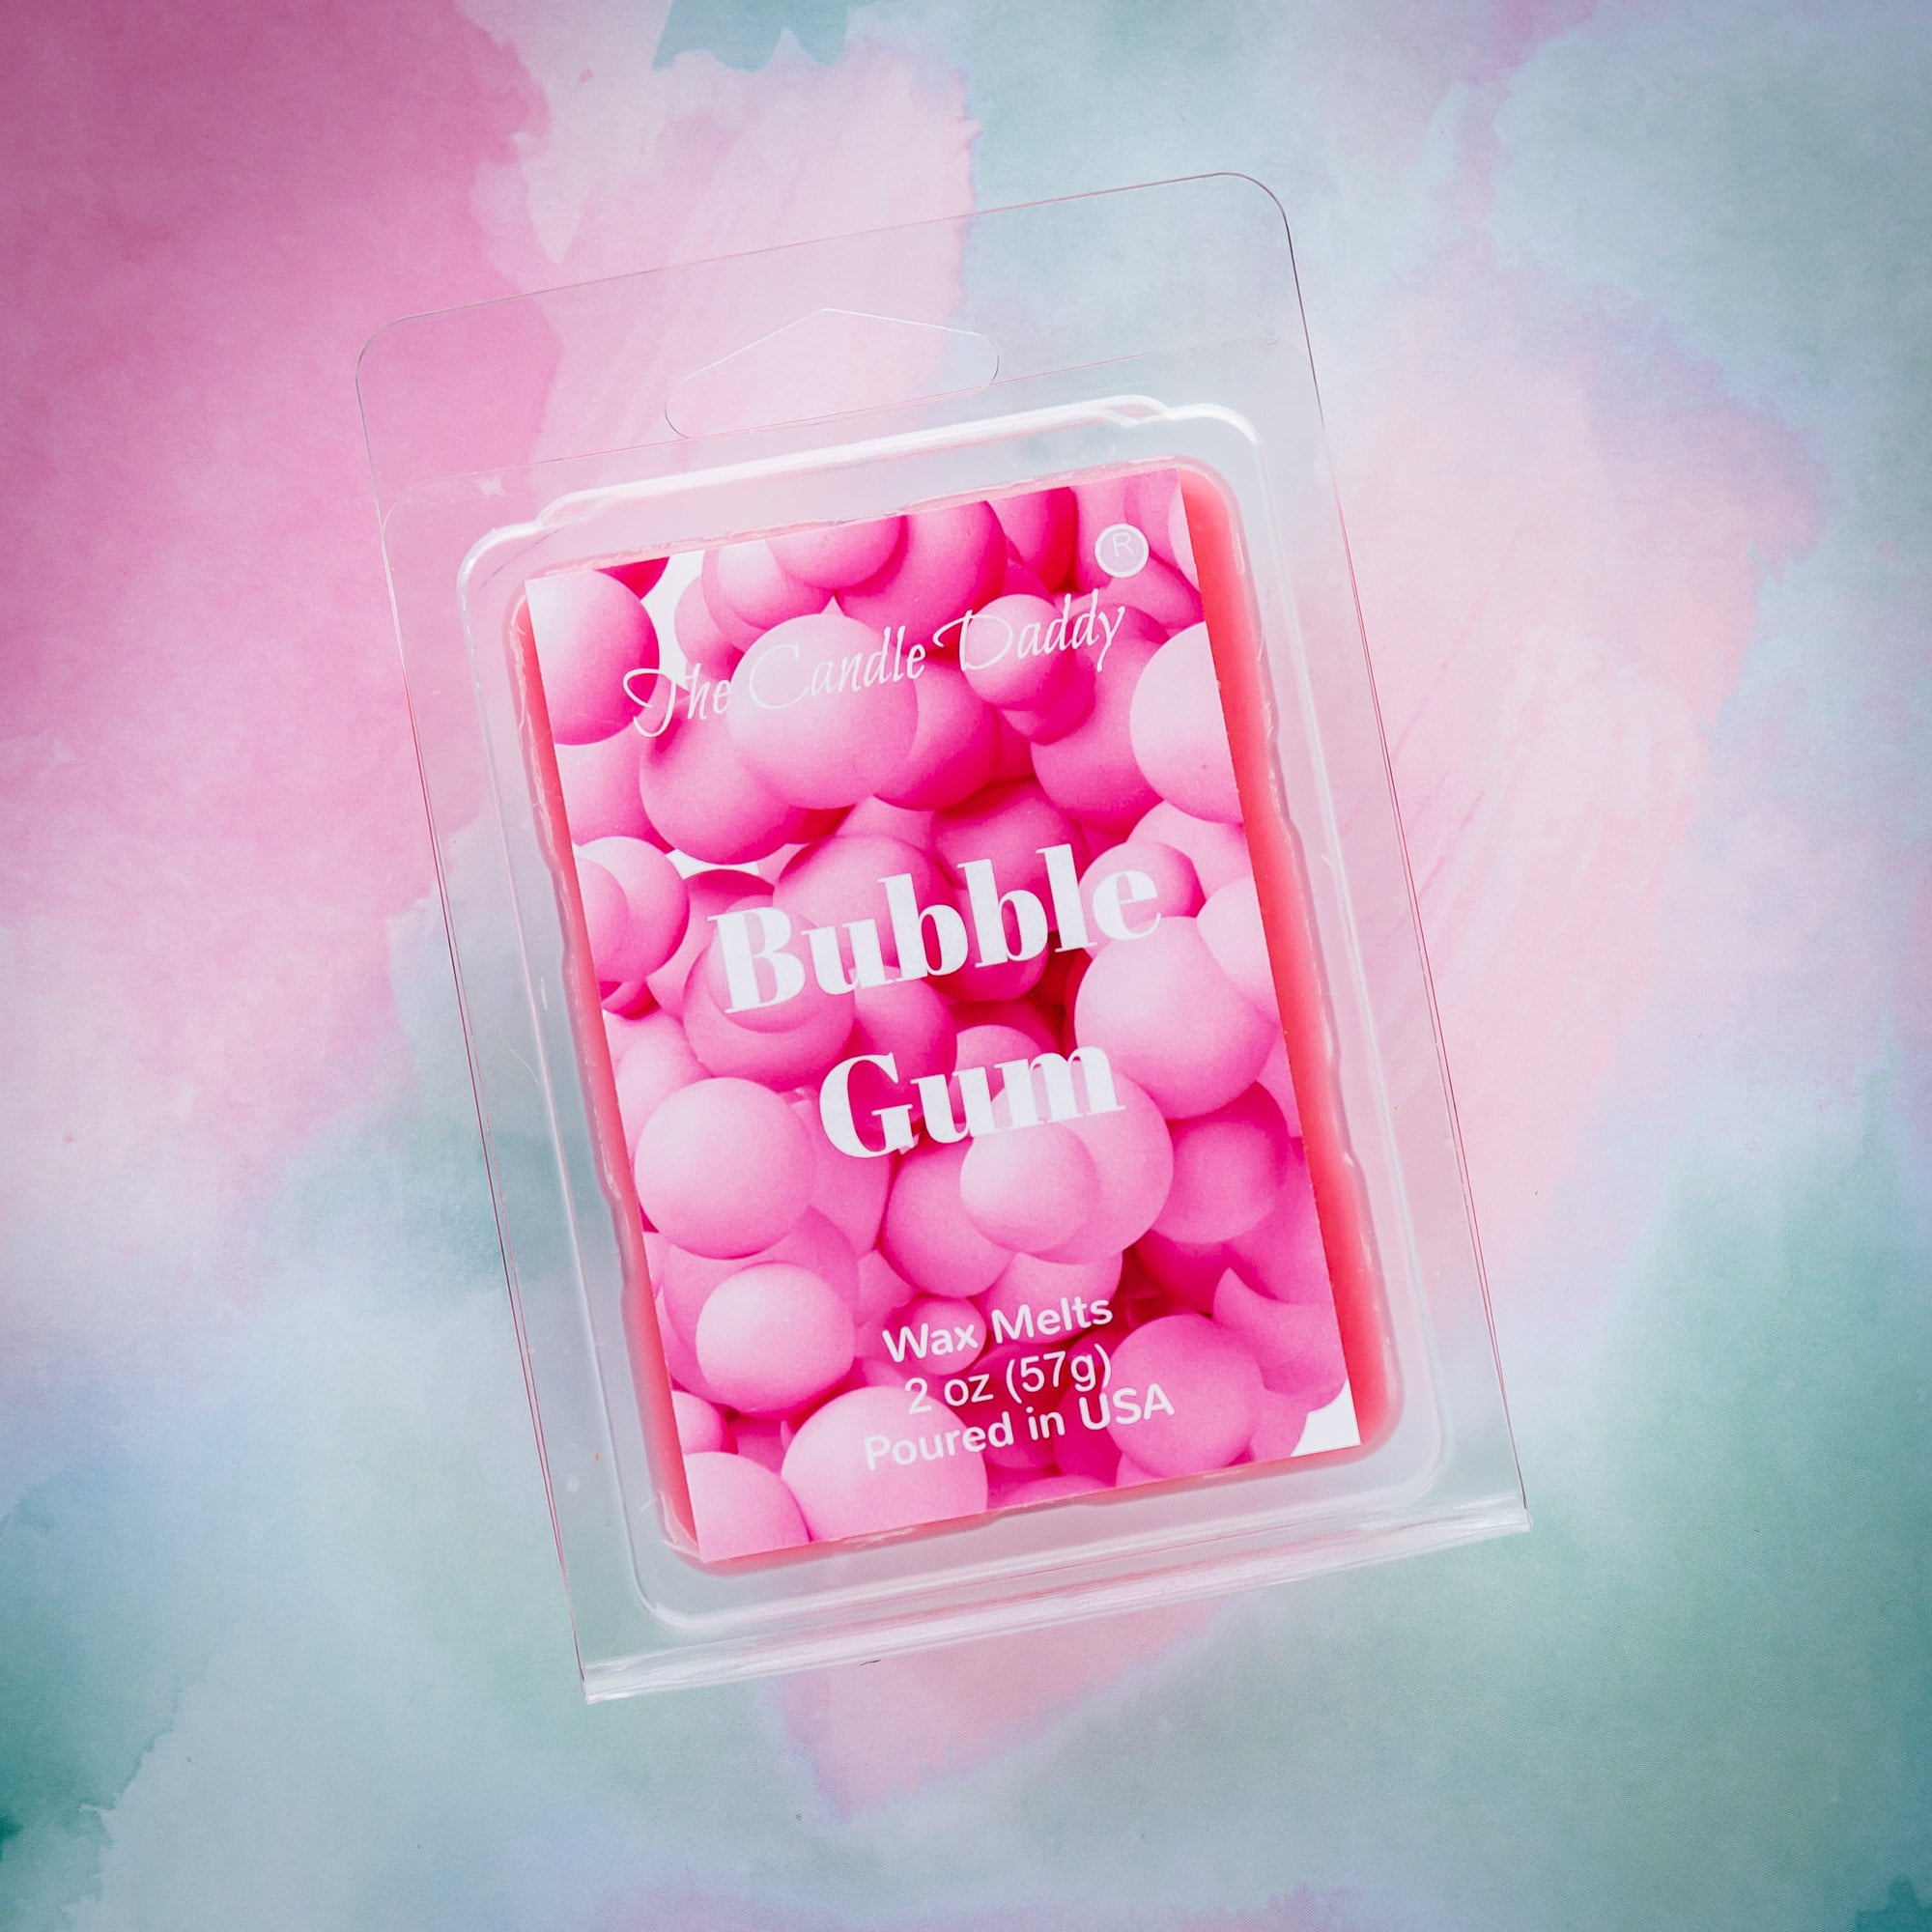 Baby Powder Wax Melts - 16 x 0.18 oz Heart Shaped Scented Wax Melts in A Gift Box 96 Hours Scent Time